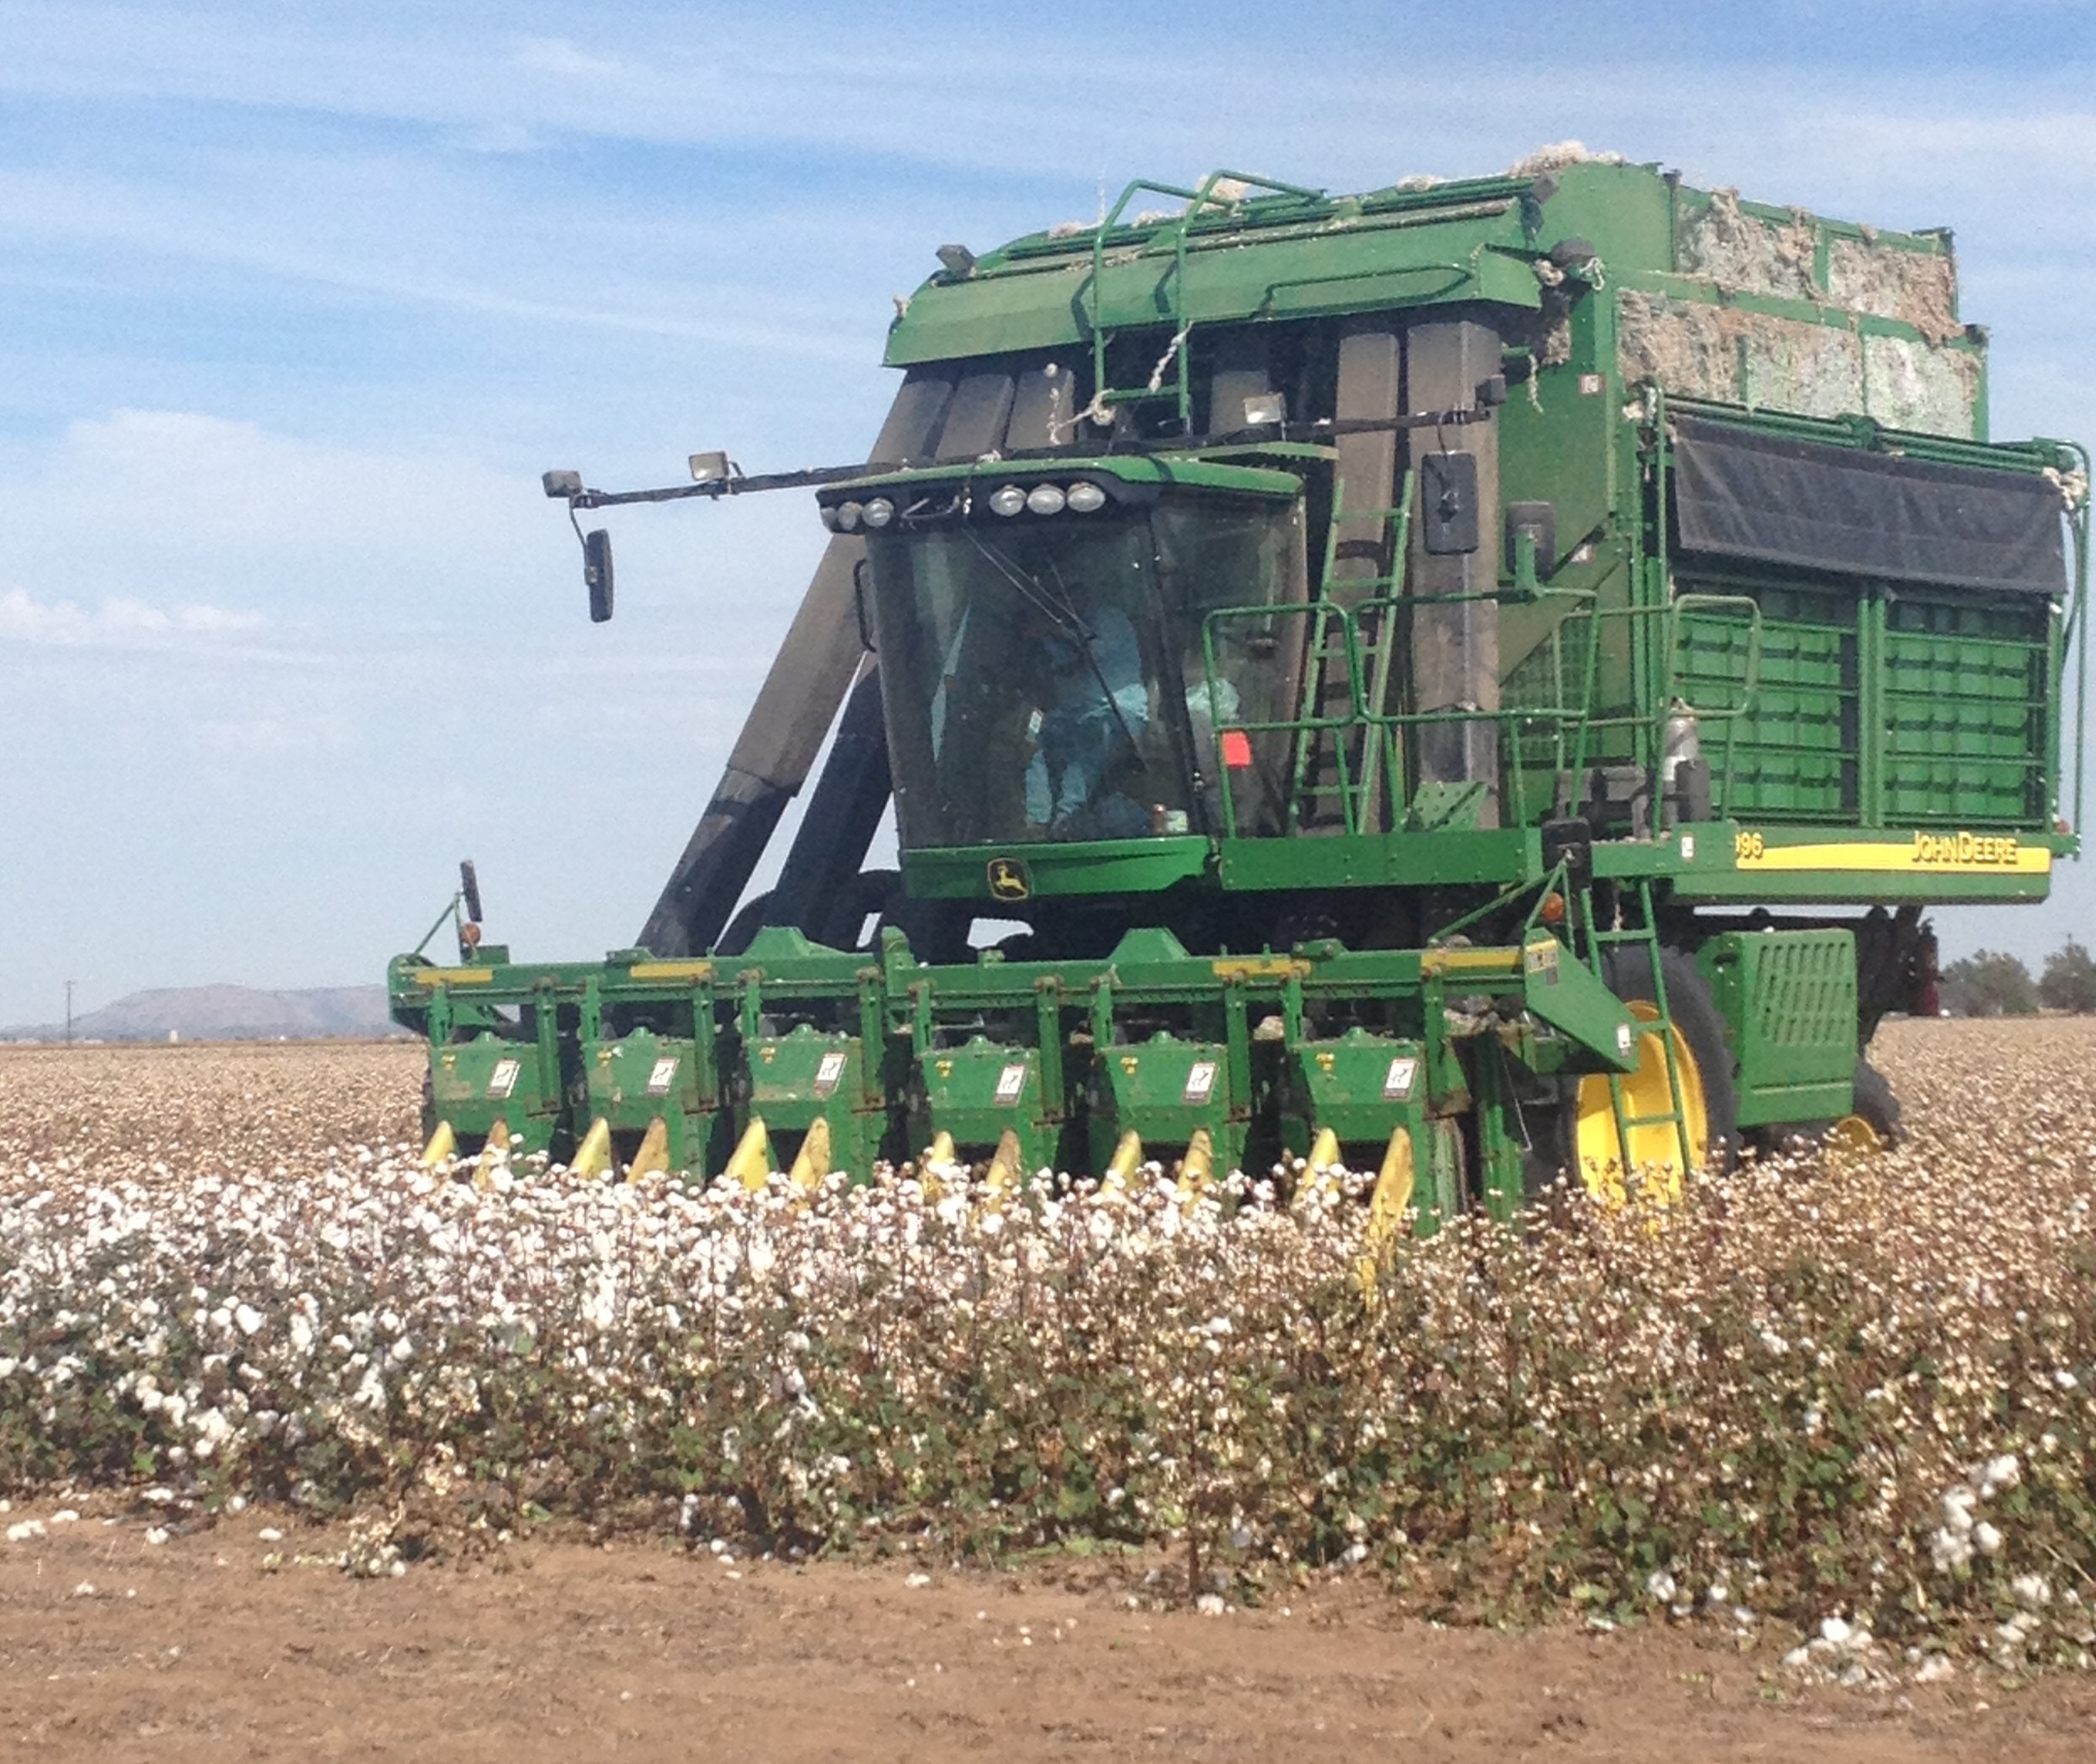 Bipartisan Coalition of Congressmen Ask USDA to Designate Cottonseed an Oilseed- Providing Cotton Farmers with Safety Net Help